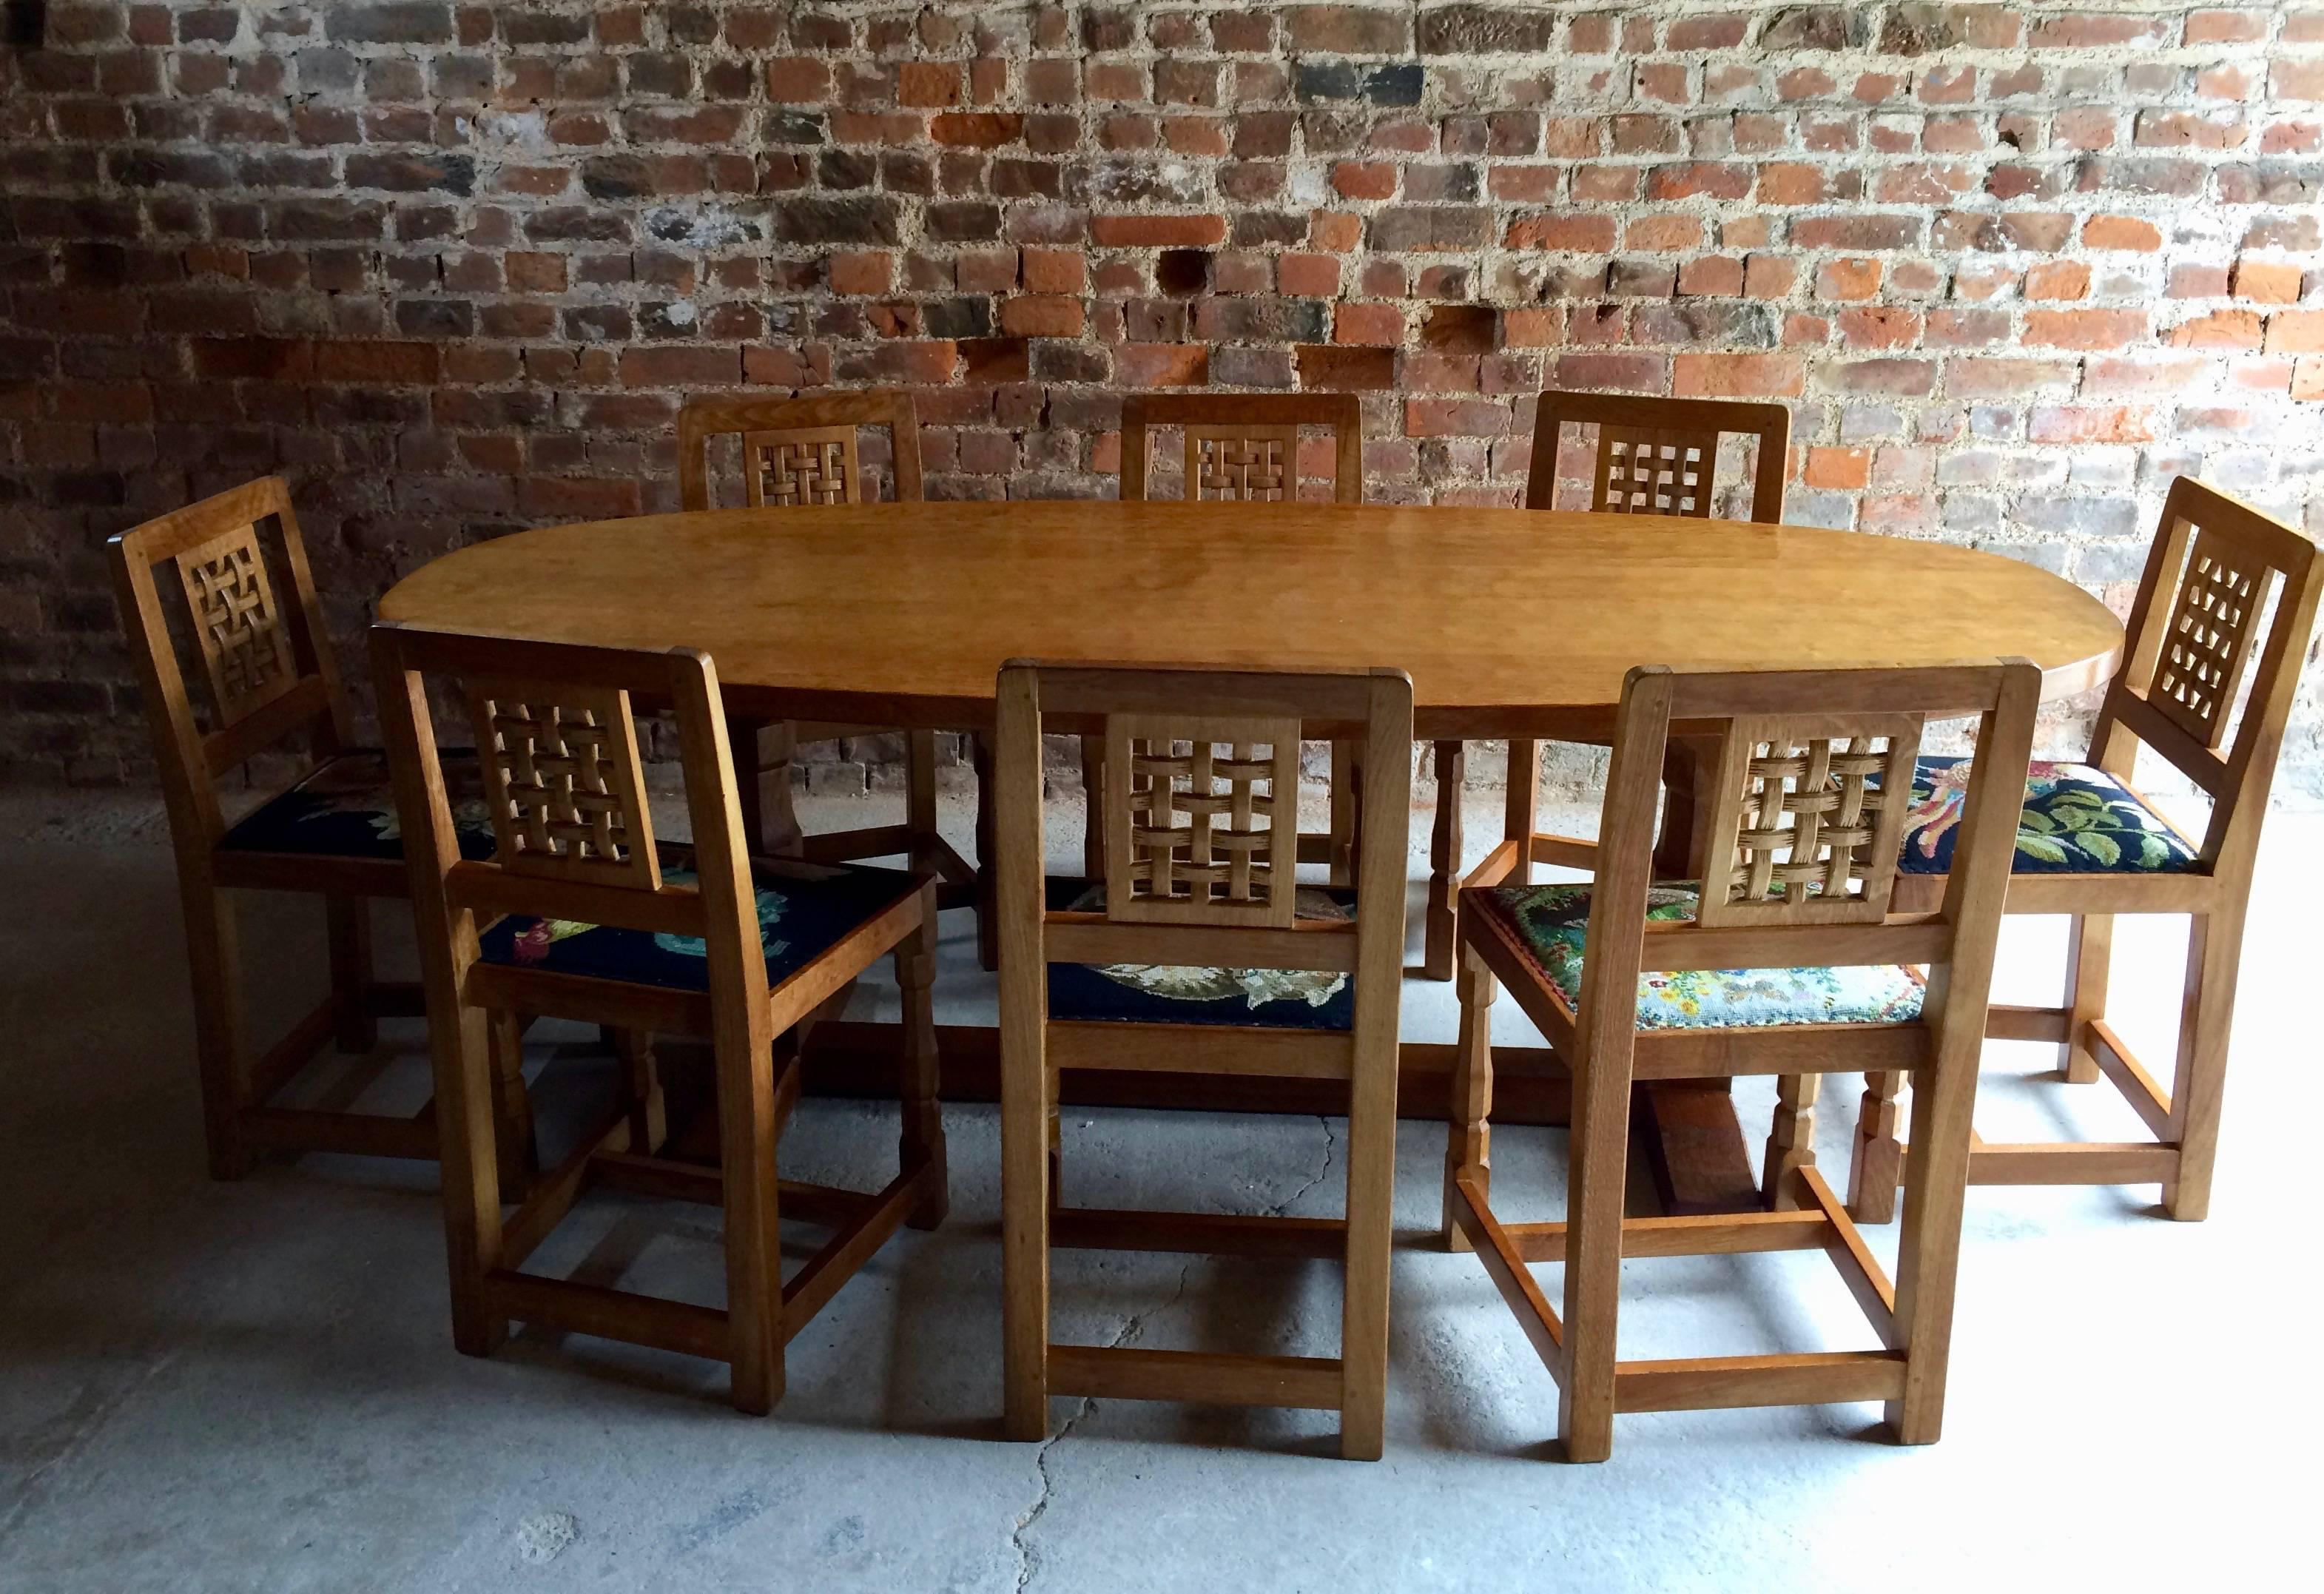 A magnificent Robert 'Mouseman' Thompson of Kilburn 'Light Fume' solid English oak dining table and Eight 'Mouseman' chairs, the refectory table seats eight people in comfort, with plenty of room for place settings, table decorations and candles,